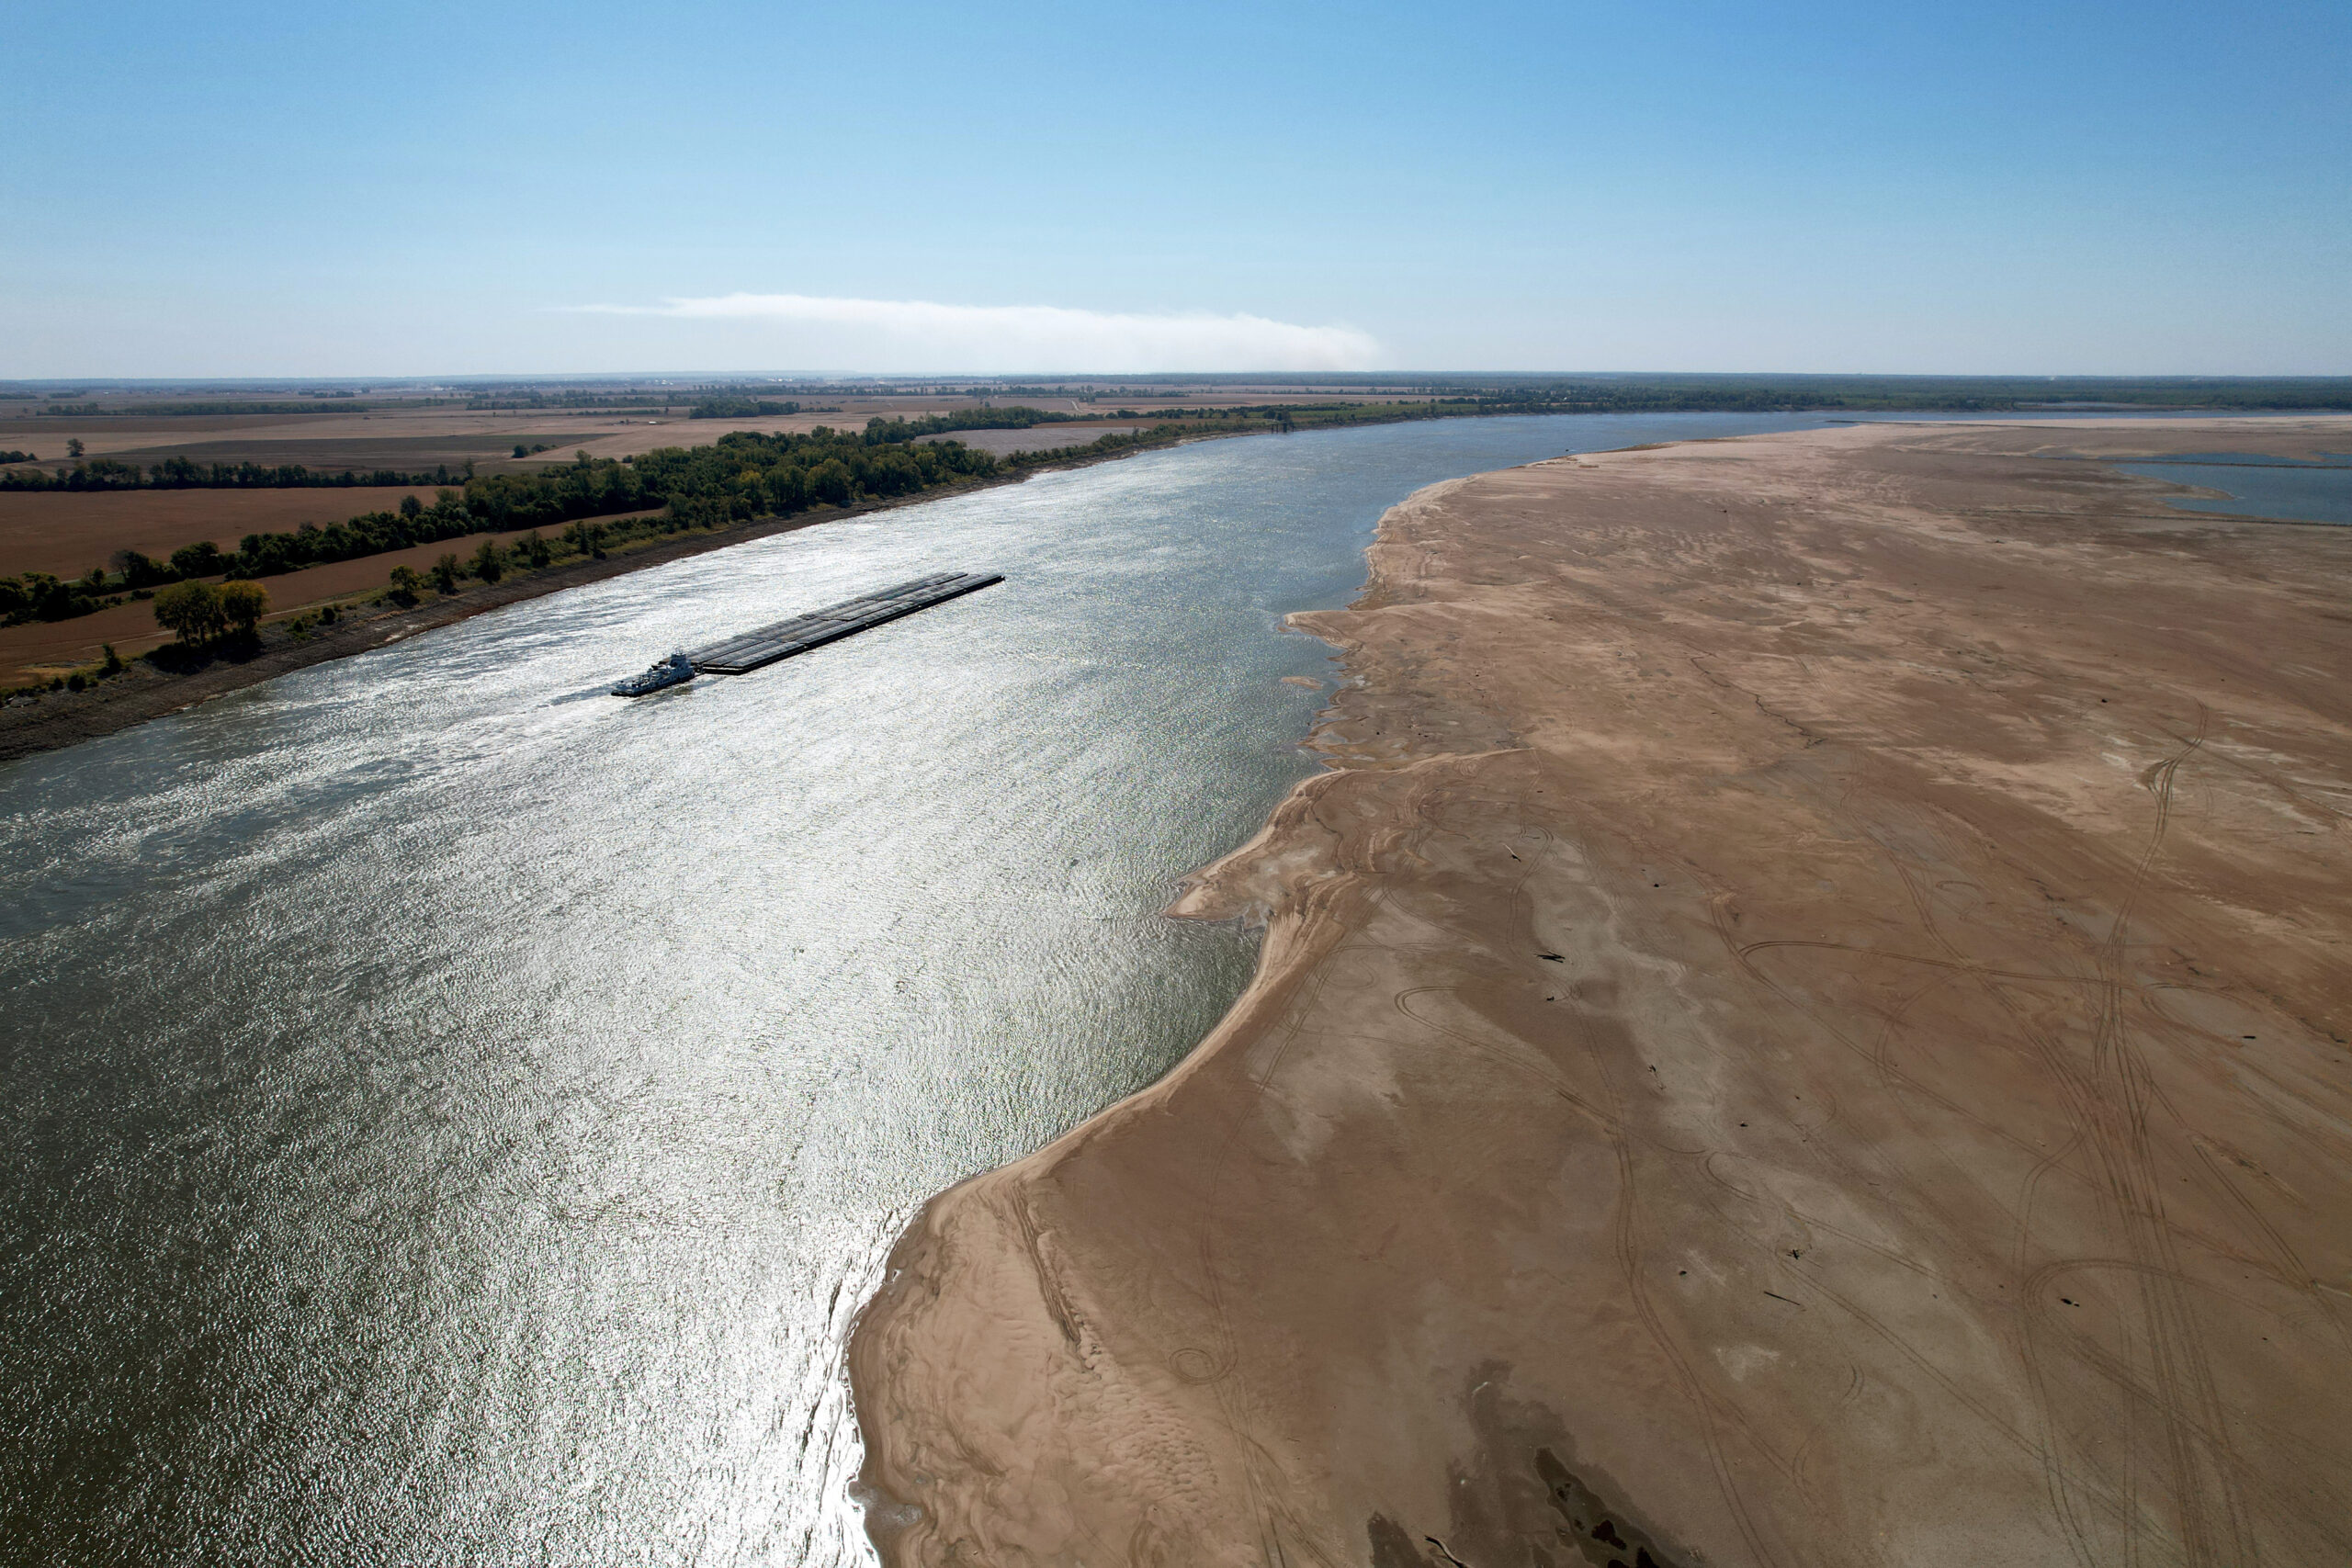 Mississippi River mayors seek a multi-state agreement to protect the river from water diversions to dry states